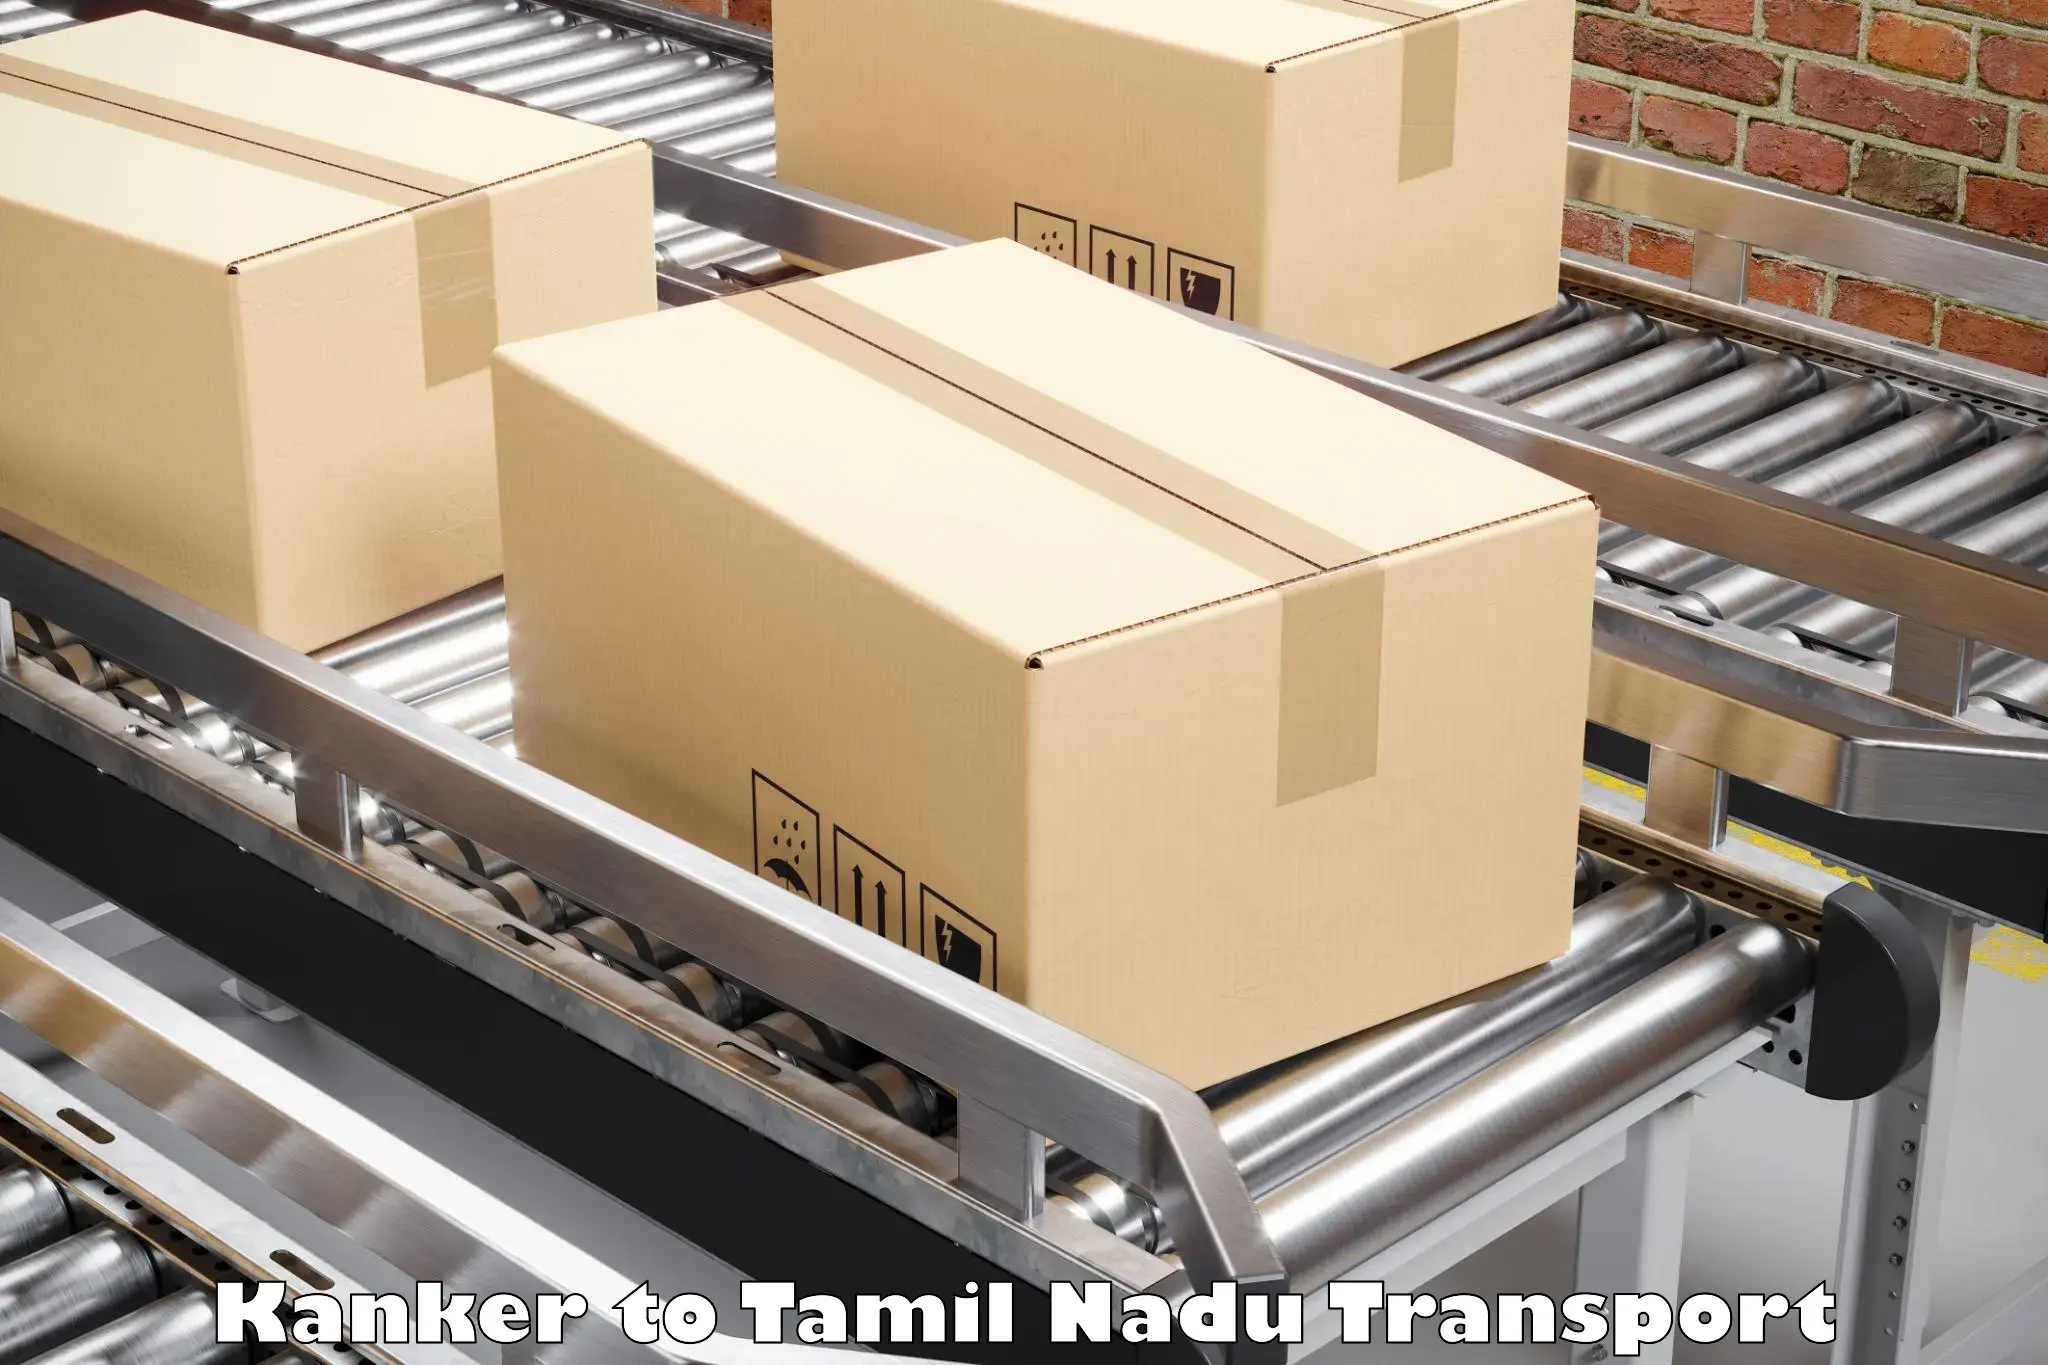 Daily transport service Kanker to Ennore Port Chennai